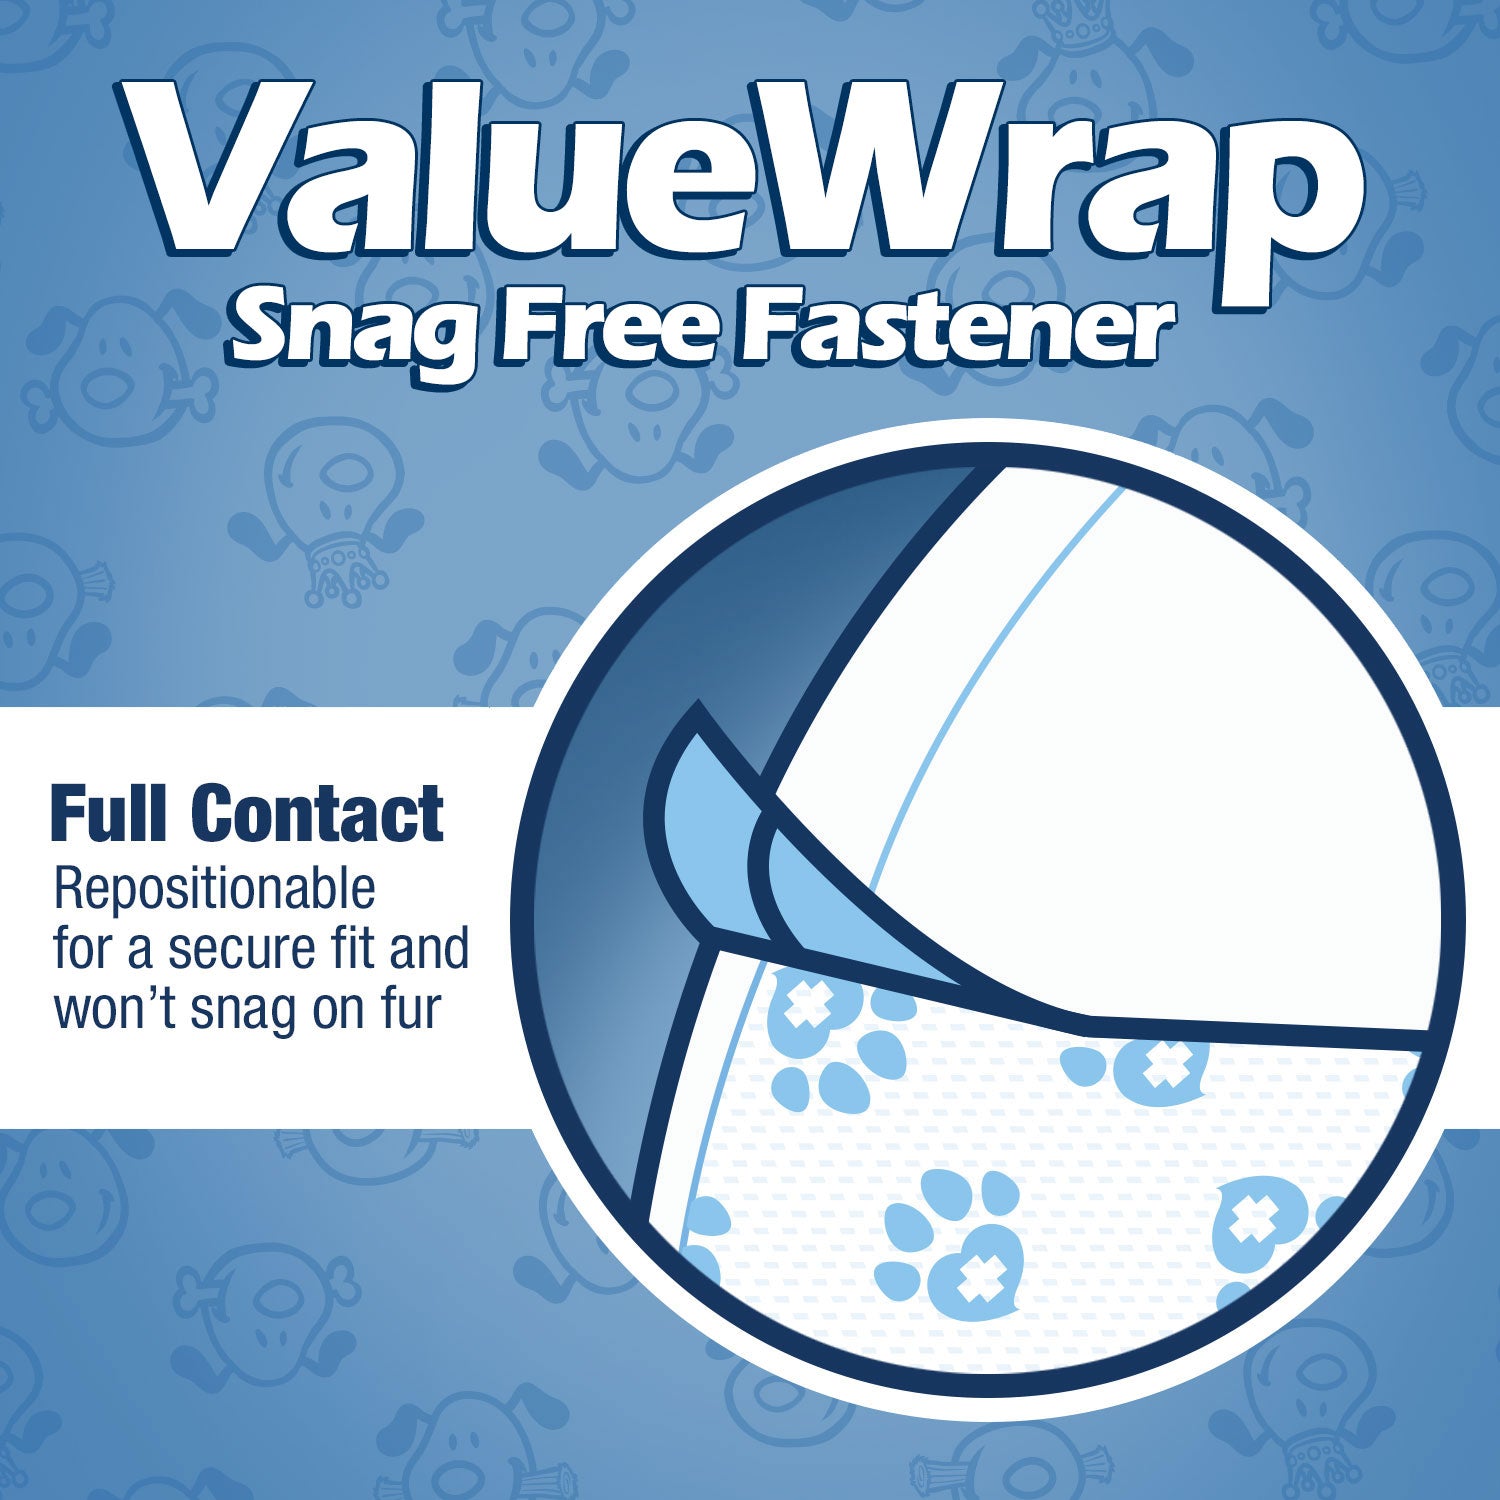 NEW- ValueWrap Male Wraps, Disposable Dog Diapers, 1-Tab X-Small, Lavender, 24 Count